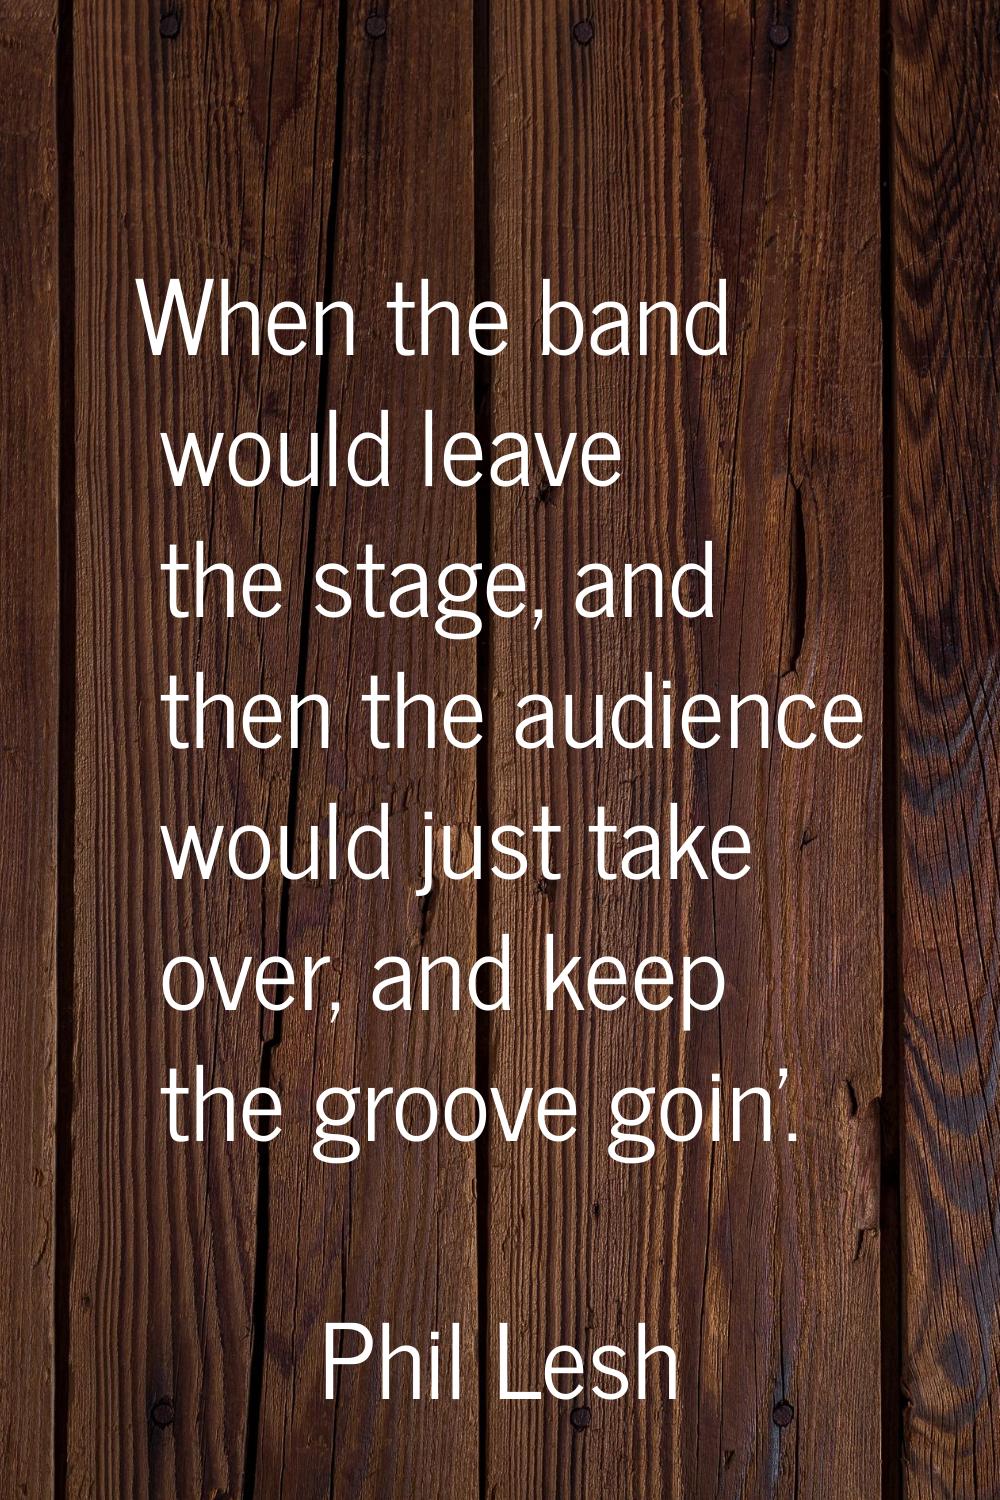 When the band would leave the stage, and then the audience would just take over, and keep the groov